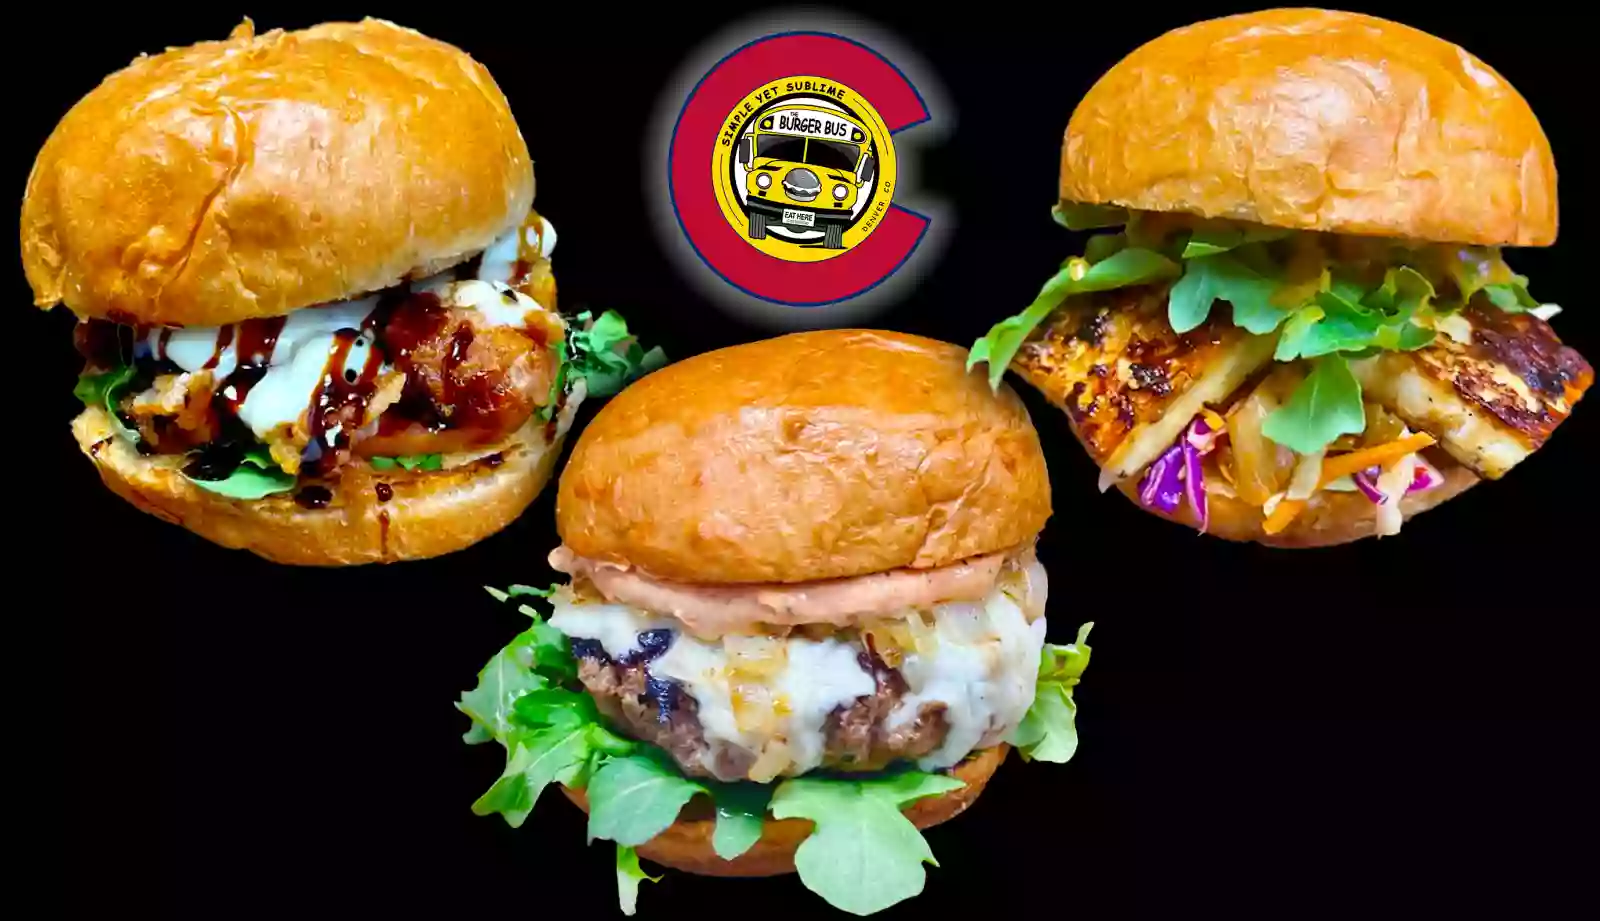 The Burger Bus Food Truck & Catering